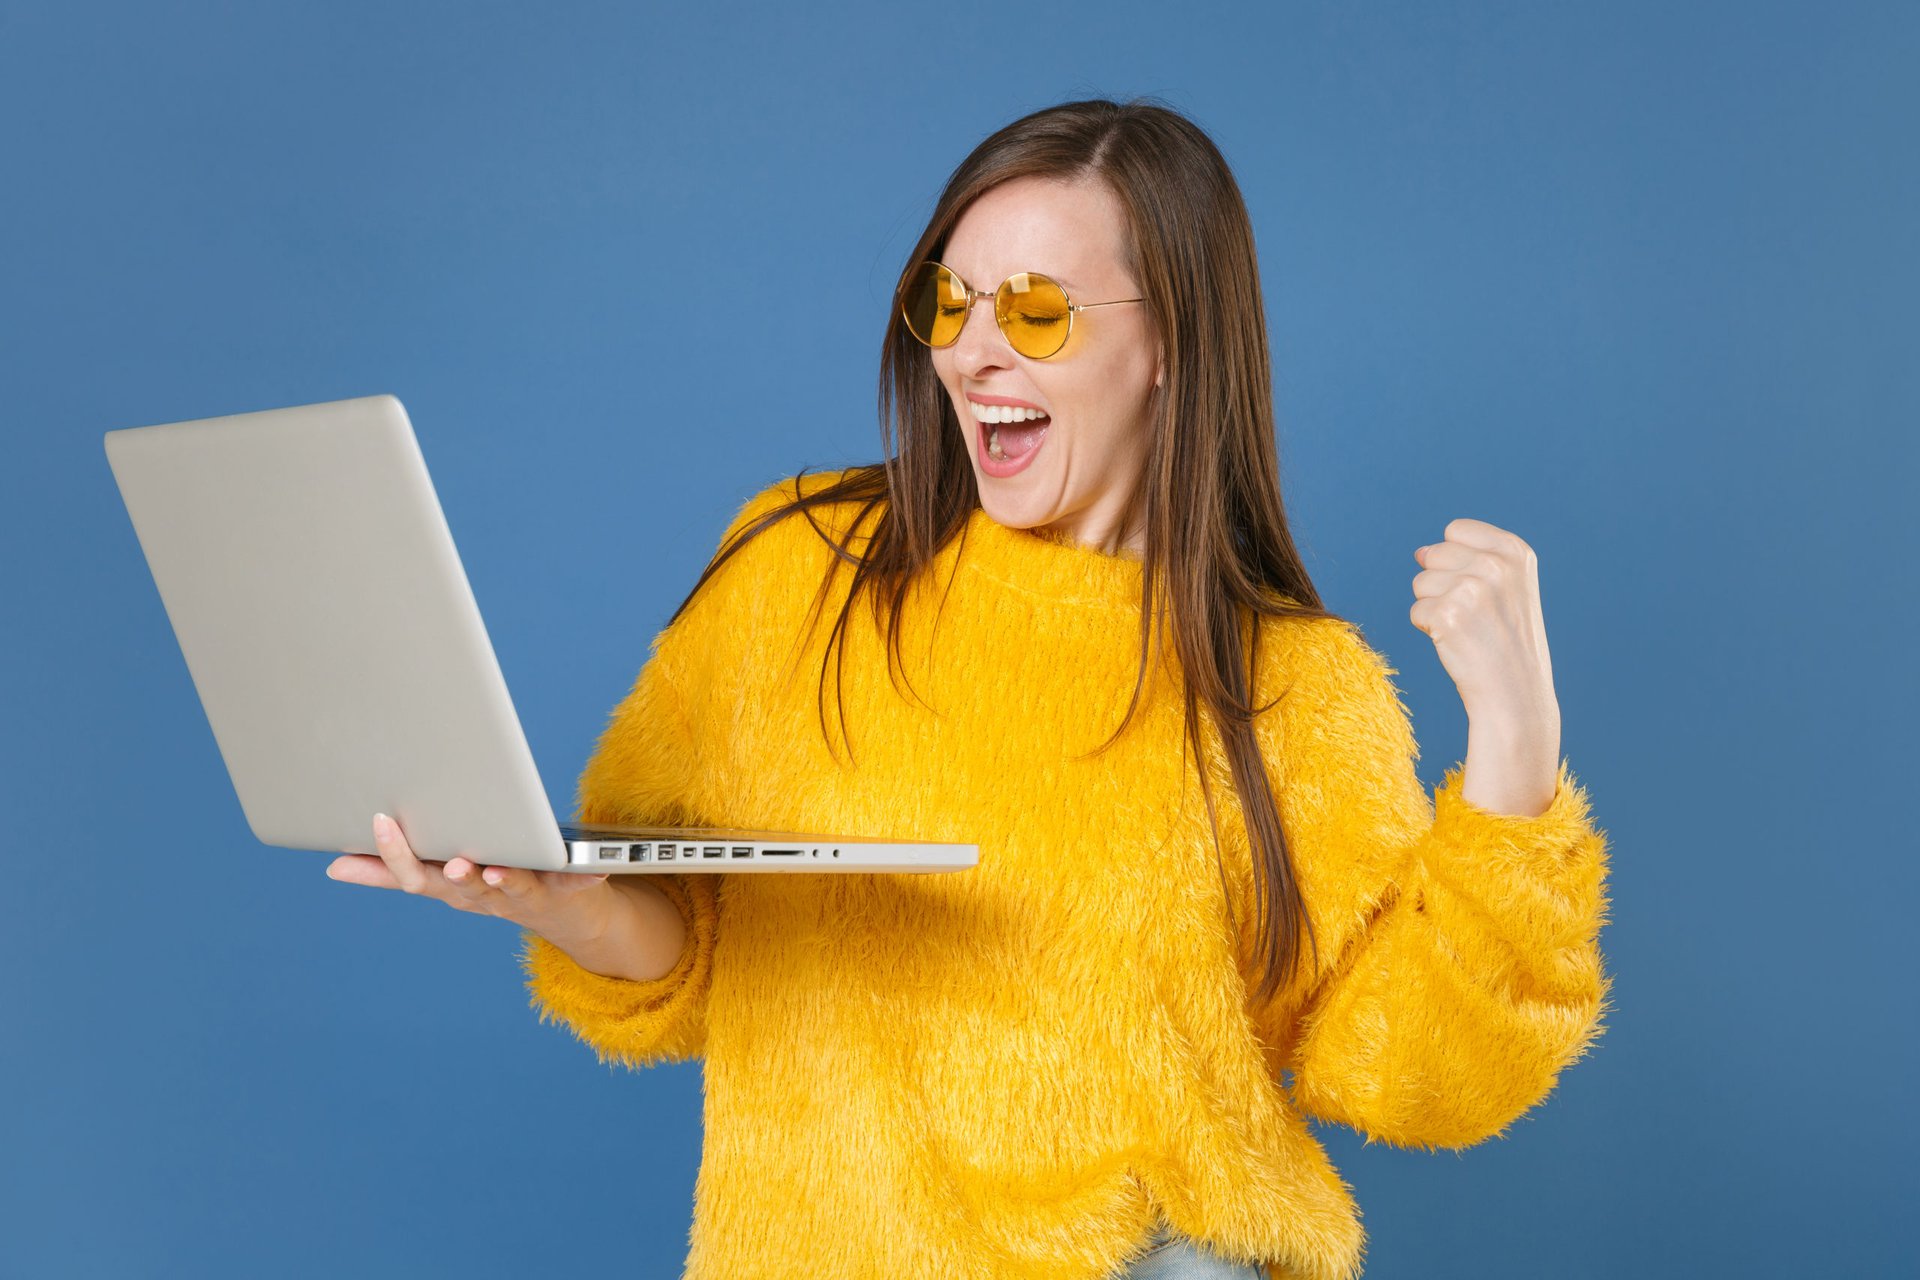 Woman happy about her internet service